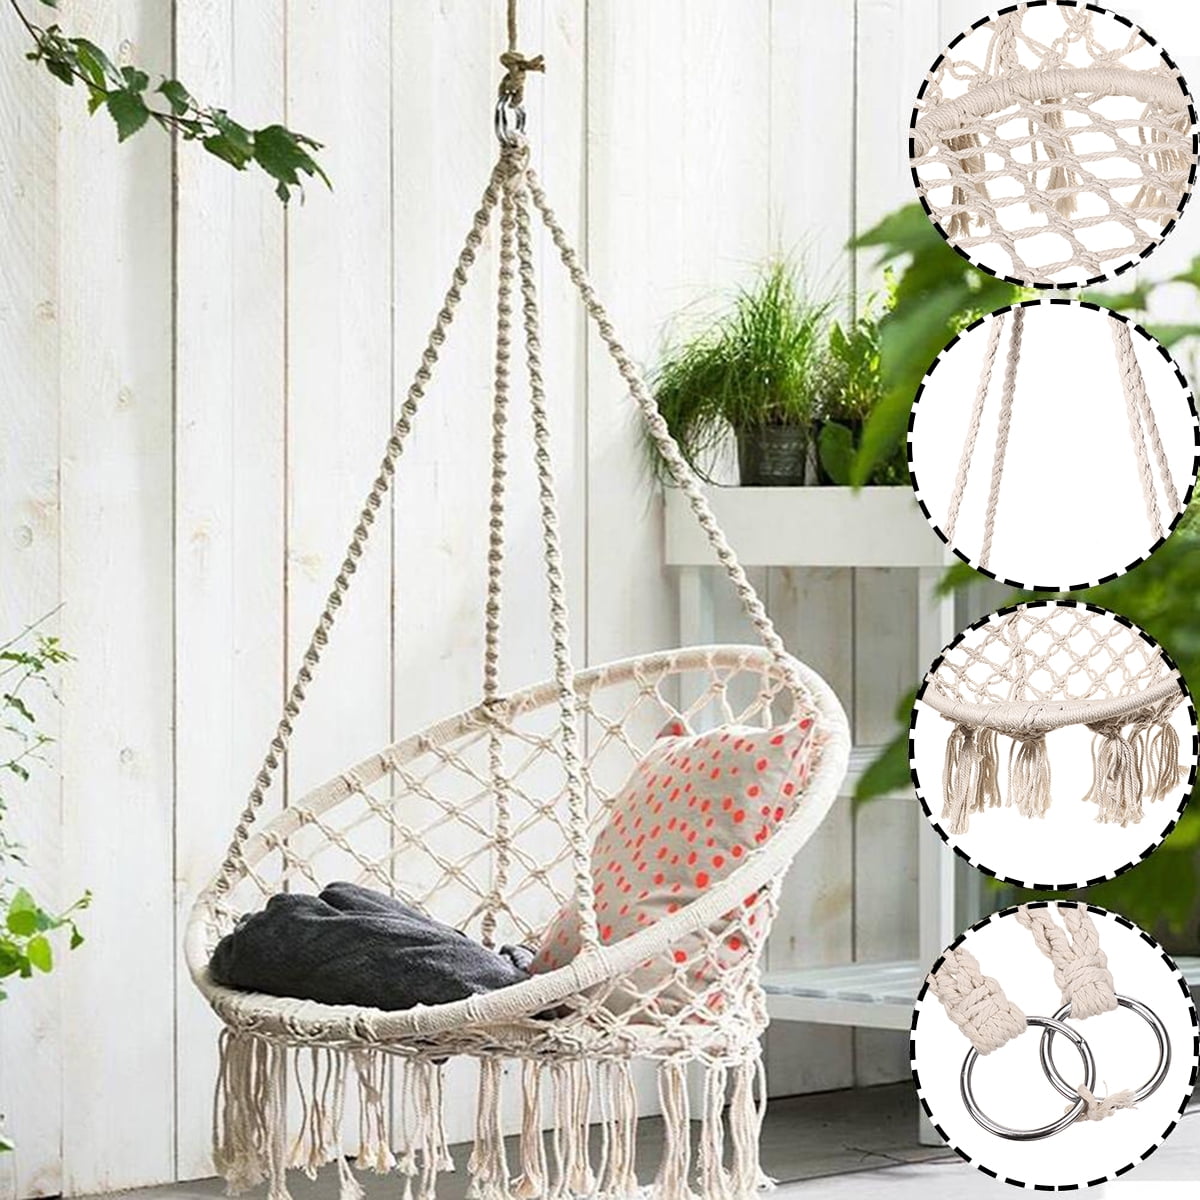 Home Balcony Indoor Garden Bedroom Hanging Chair for Child and Adult Swinging Single Safety Chair with Bracket 160cm with Steel Stand in Random Color Sondre Camping Lightweight Hammock Chair